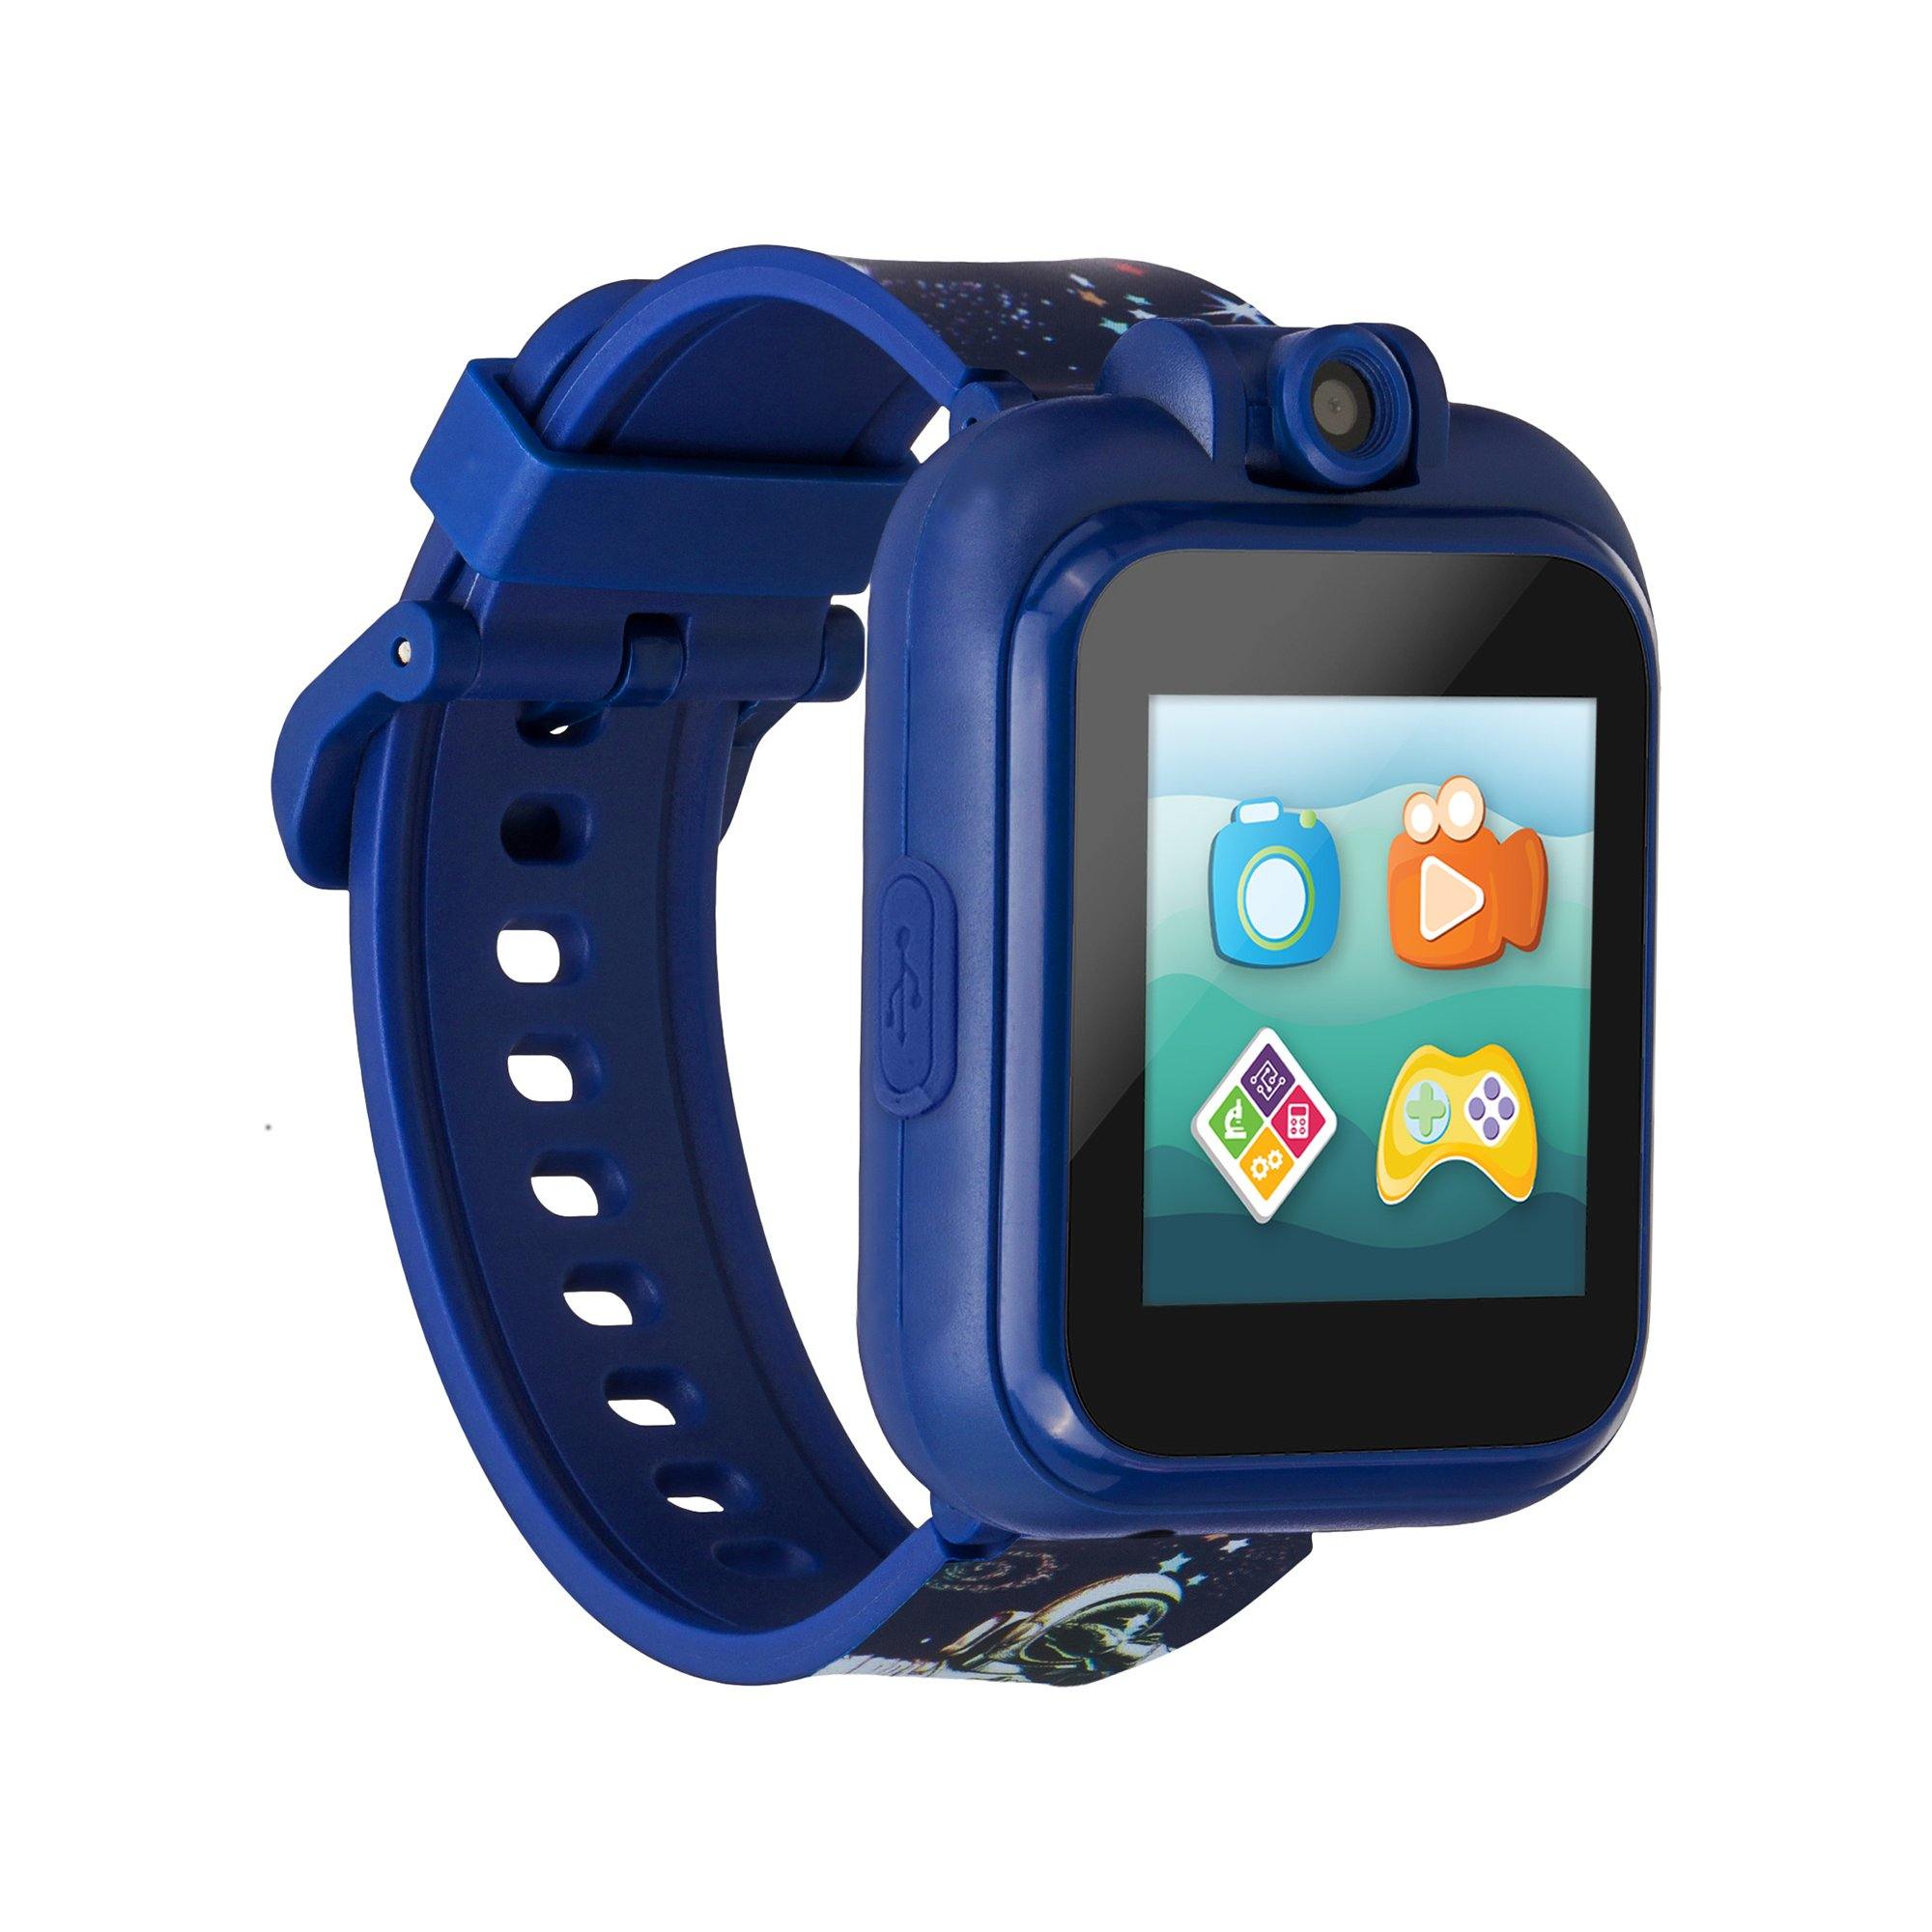 PlayZoom 2 Kids Smartwatch: Spaceman Print affordable smart watch